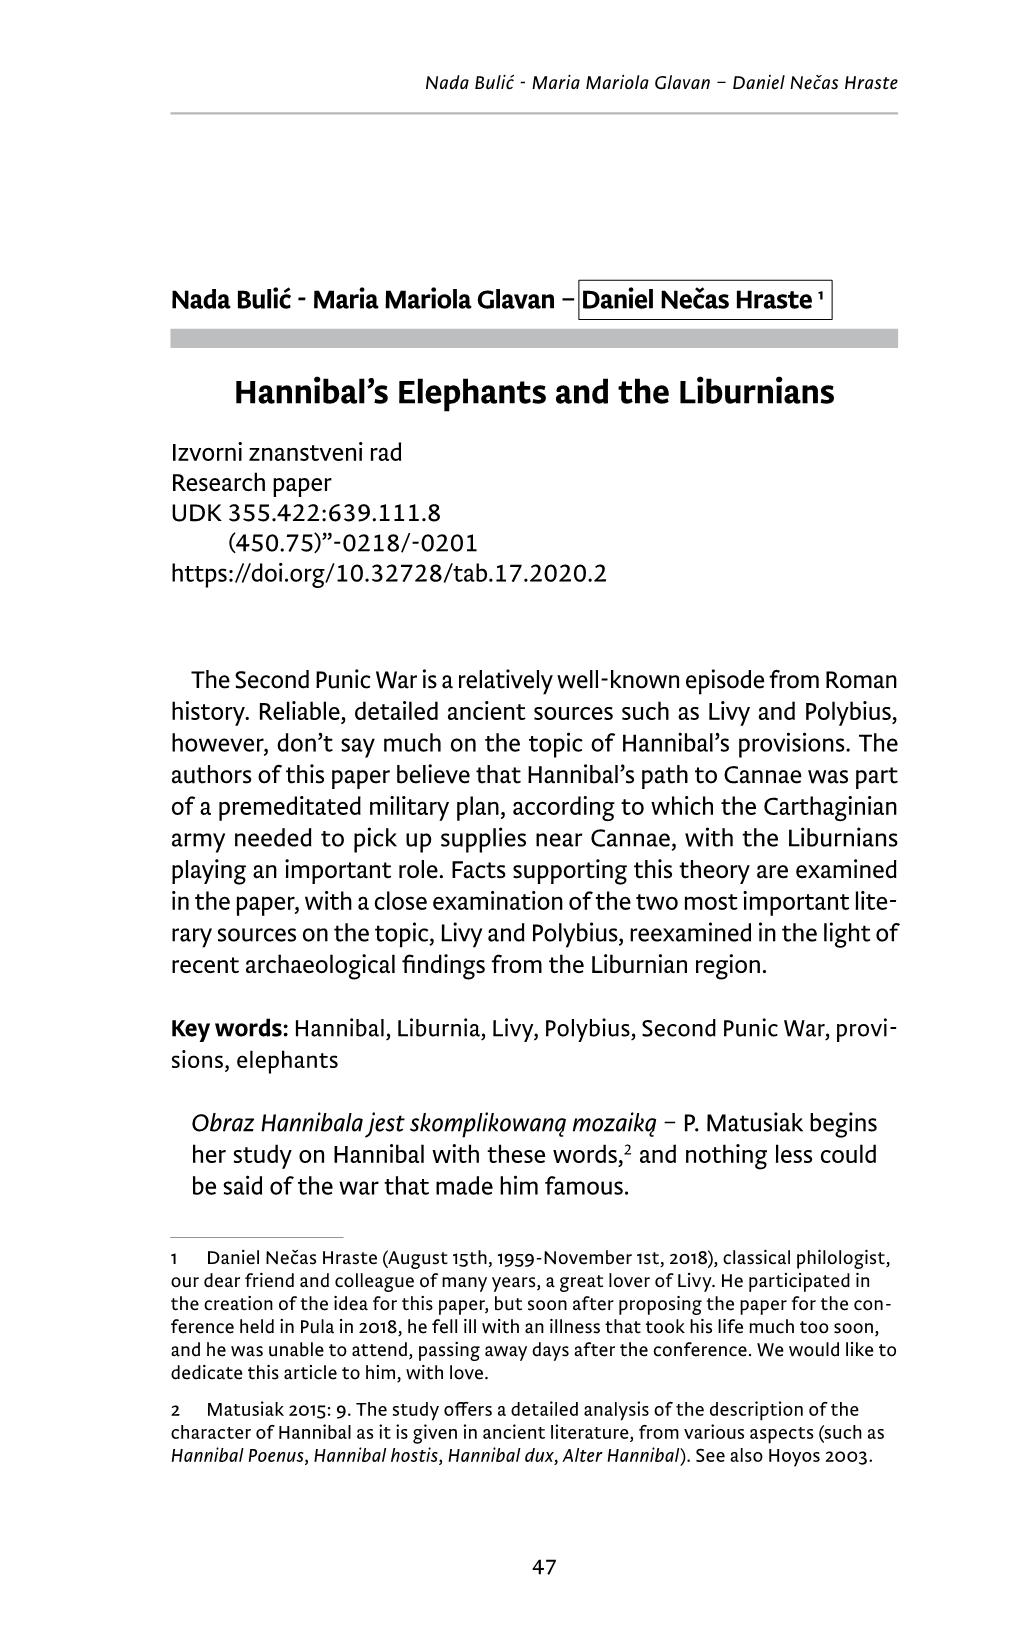 Hannibal's Elephants and the Liburnians